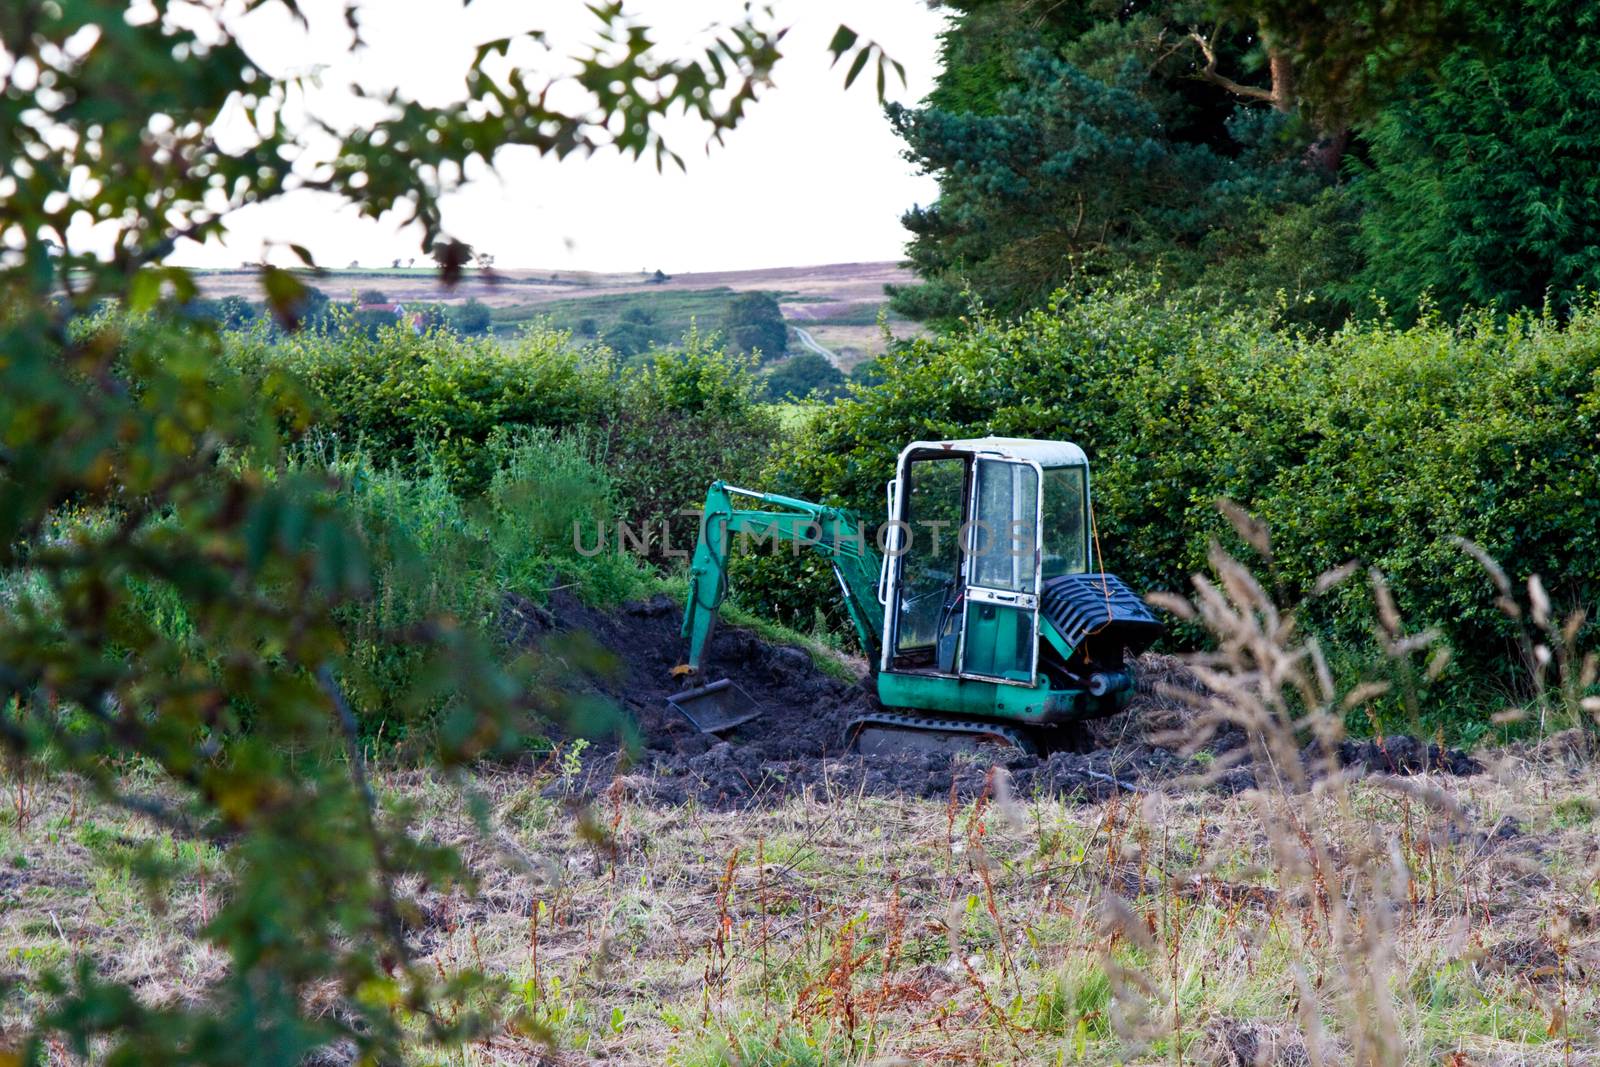 Digger in a field by samULvisuals